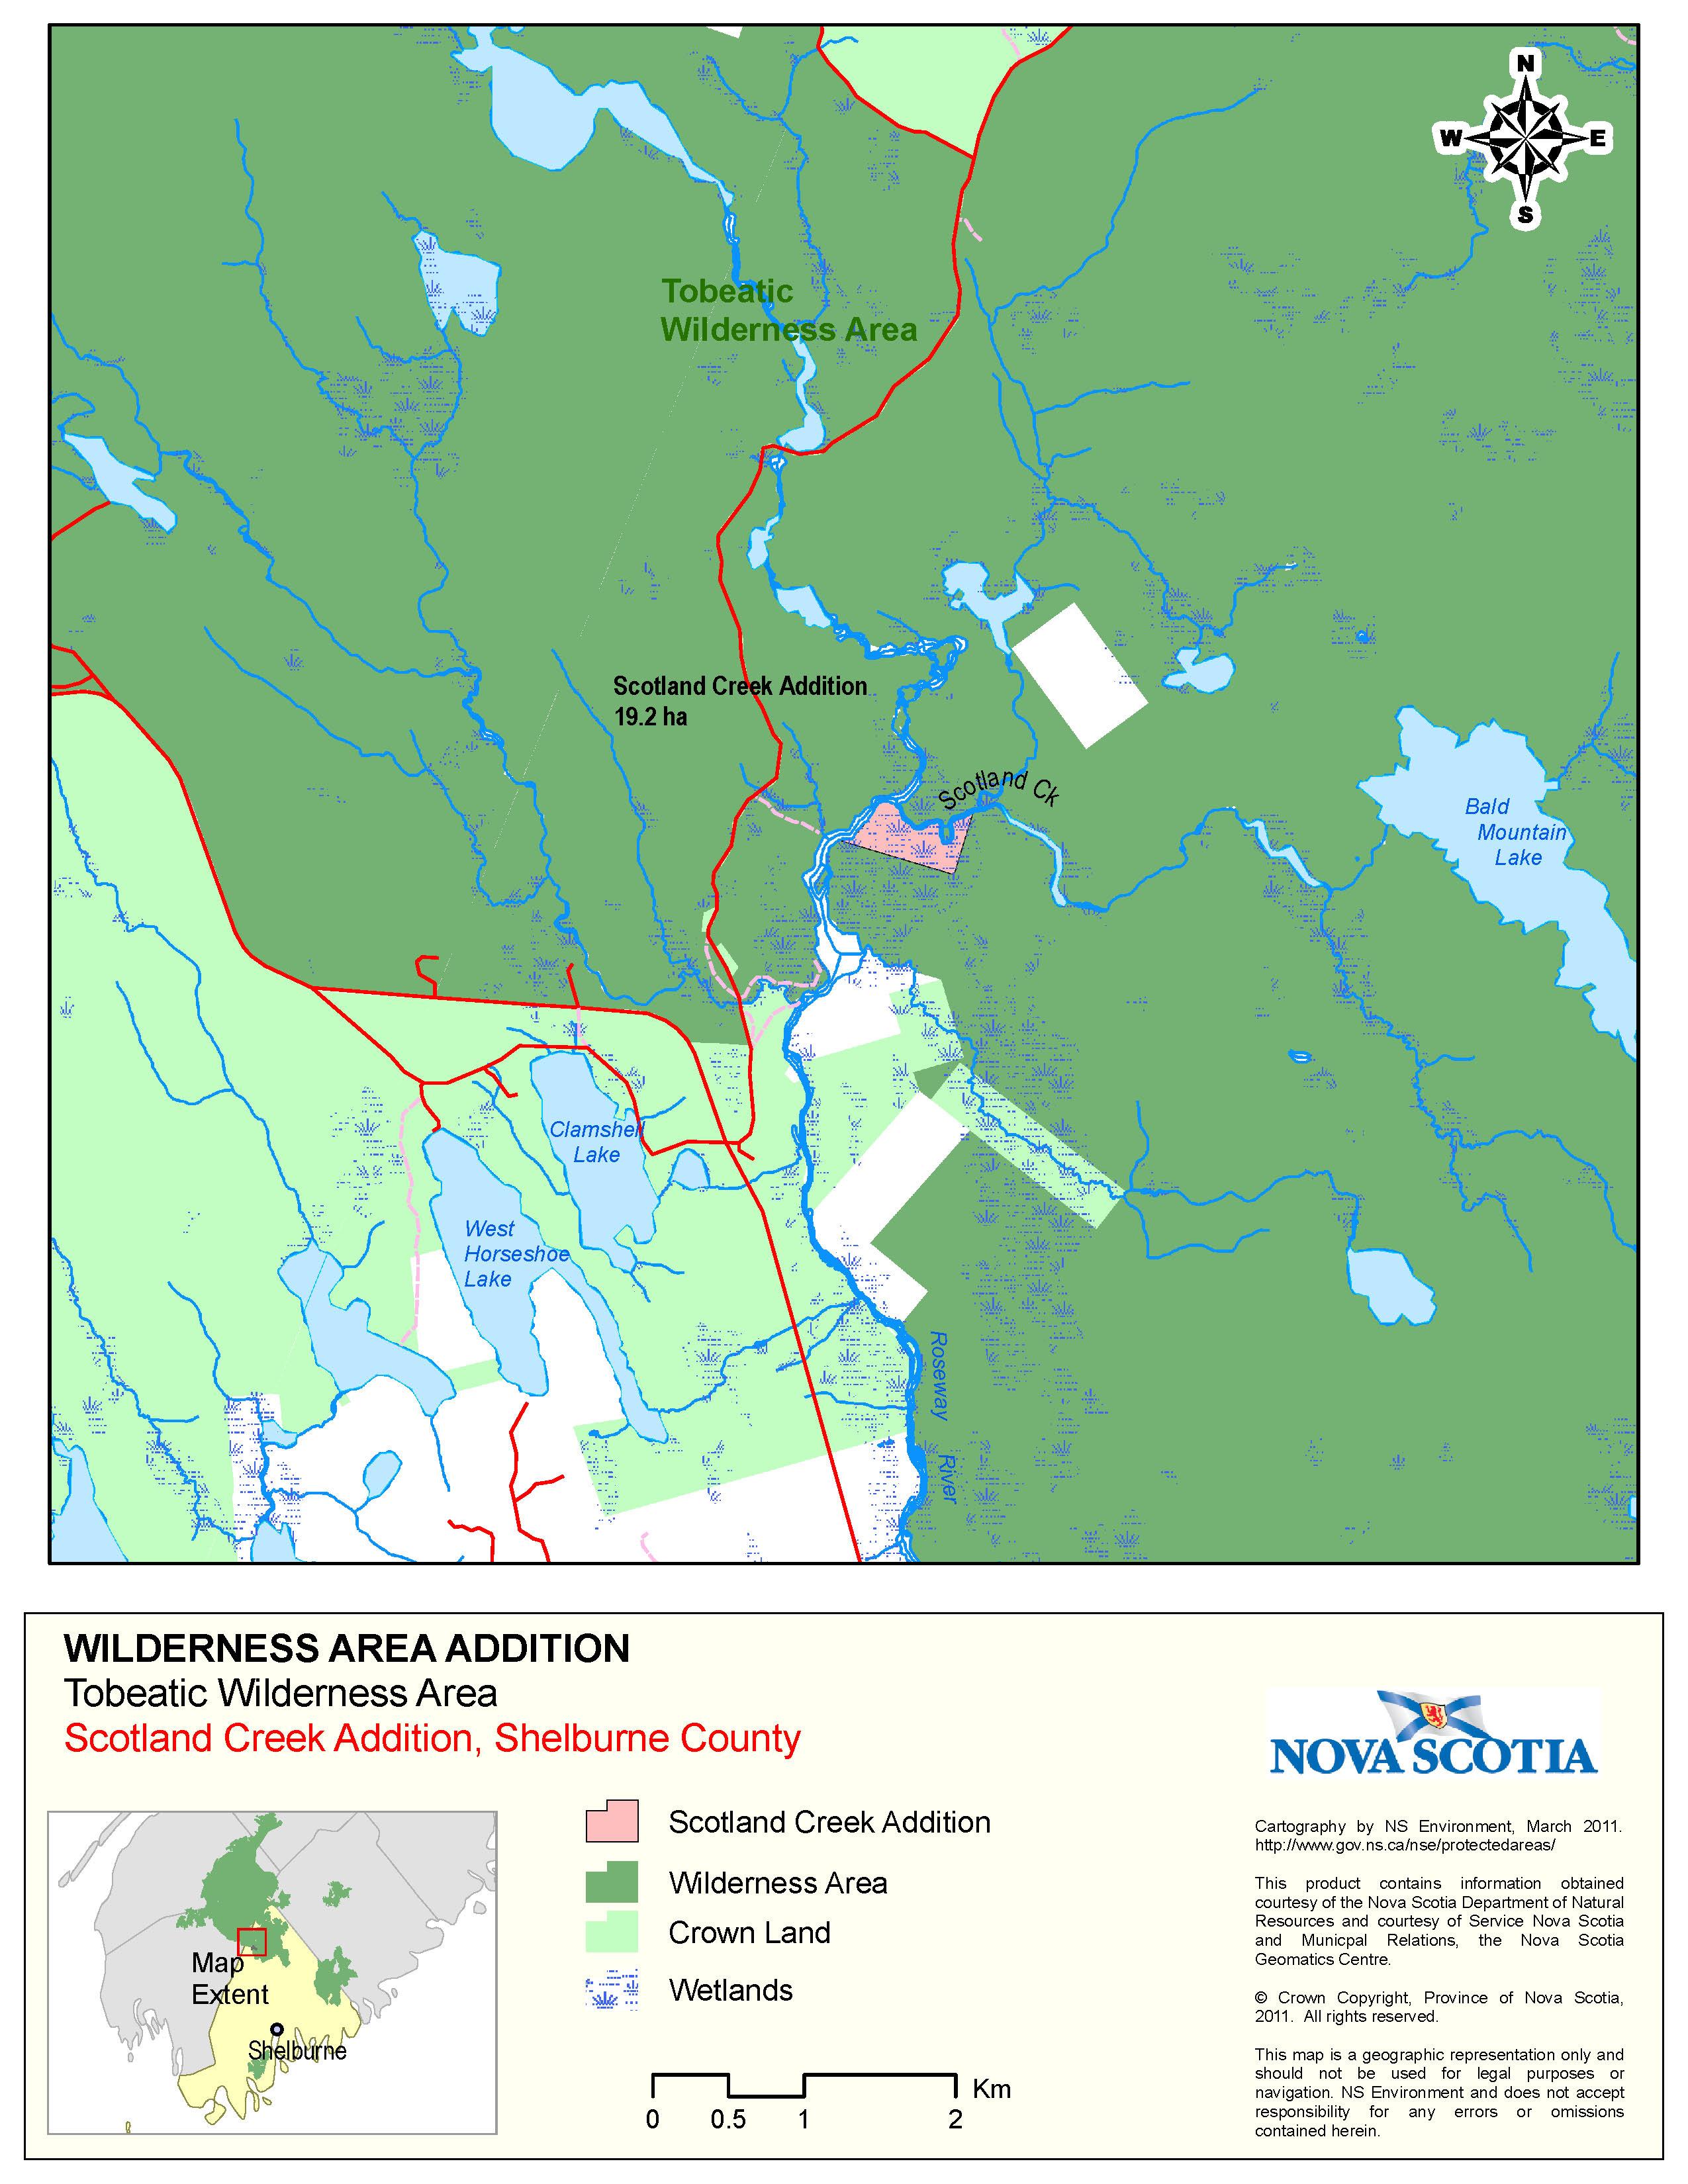 Approximate Boundaries of Crown Land at Scotland Creek, Shelburne County